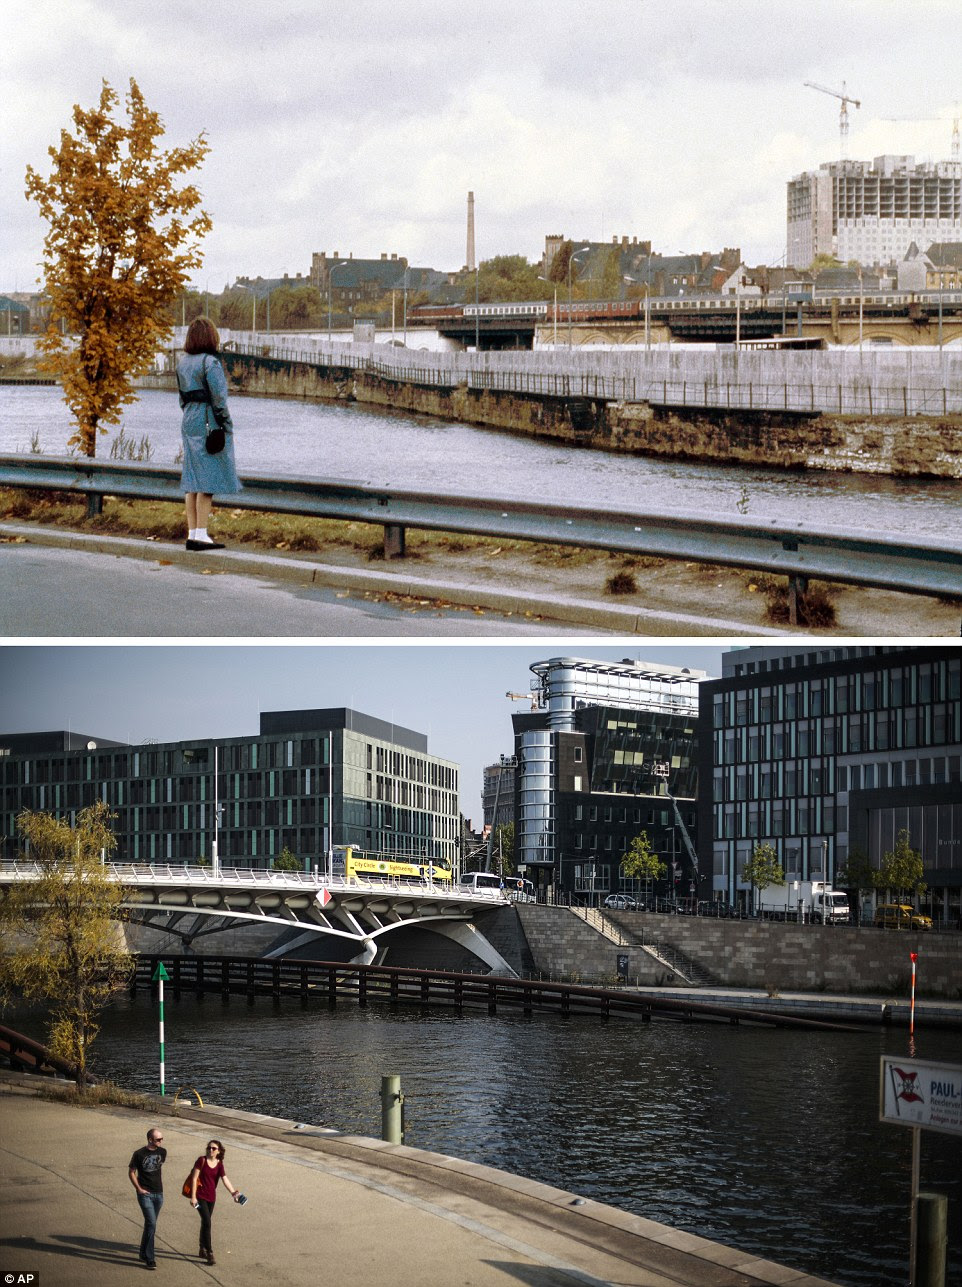 A river runs through it: A woman looks out across the Spree river at the Berlin Wall in 1980, with construction work taking place at the Charite hospital in background. Today a bridge links the two sides of the river, which has a number of modern buildings along its banks